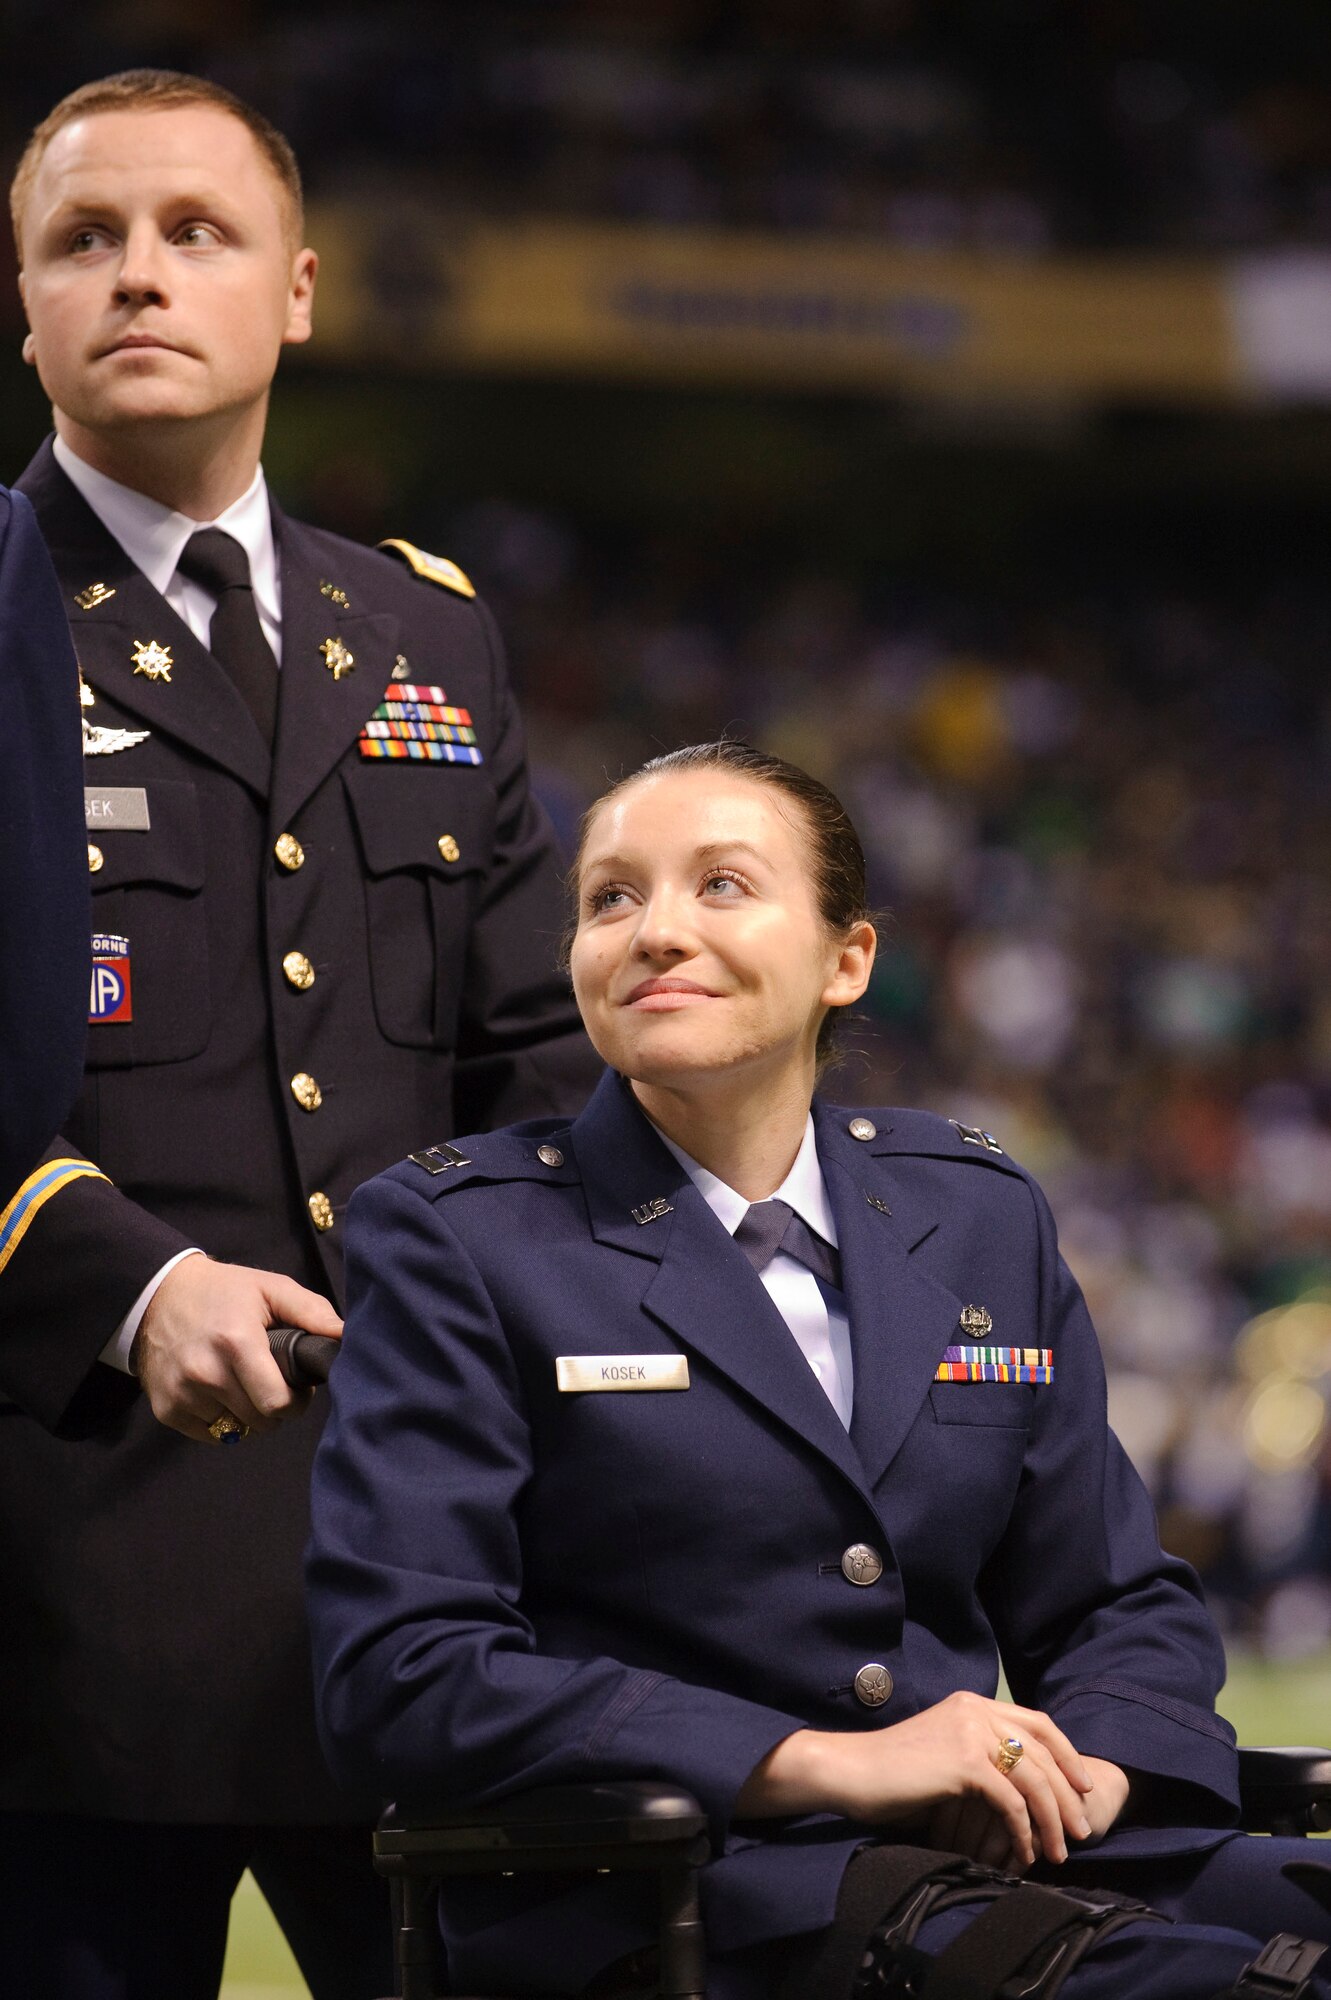 Army Capt. Joe Kosek, assistant professor of Army Science for the Notre Dame Army ROTC program and his sister Air Force Capt. Wendy Kosek were among alumni recognized during a ceremony at half-time of the Notre Dame, Washington State football game held at the Alamodome in San Antonio, Texas. Capt. Wendy Kosek is currently recovering from injuries sustained while deployed, and holds a bachelor's and law degree from Notre Dame University. (U.S. Air Force by Steve Thurow)